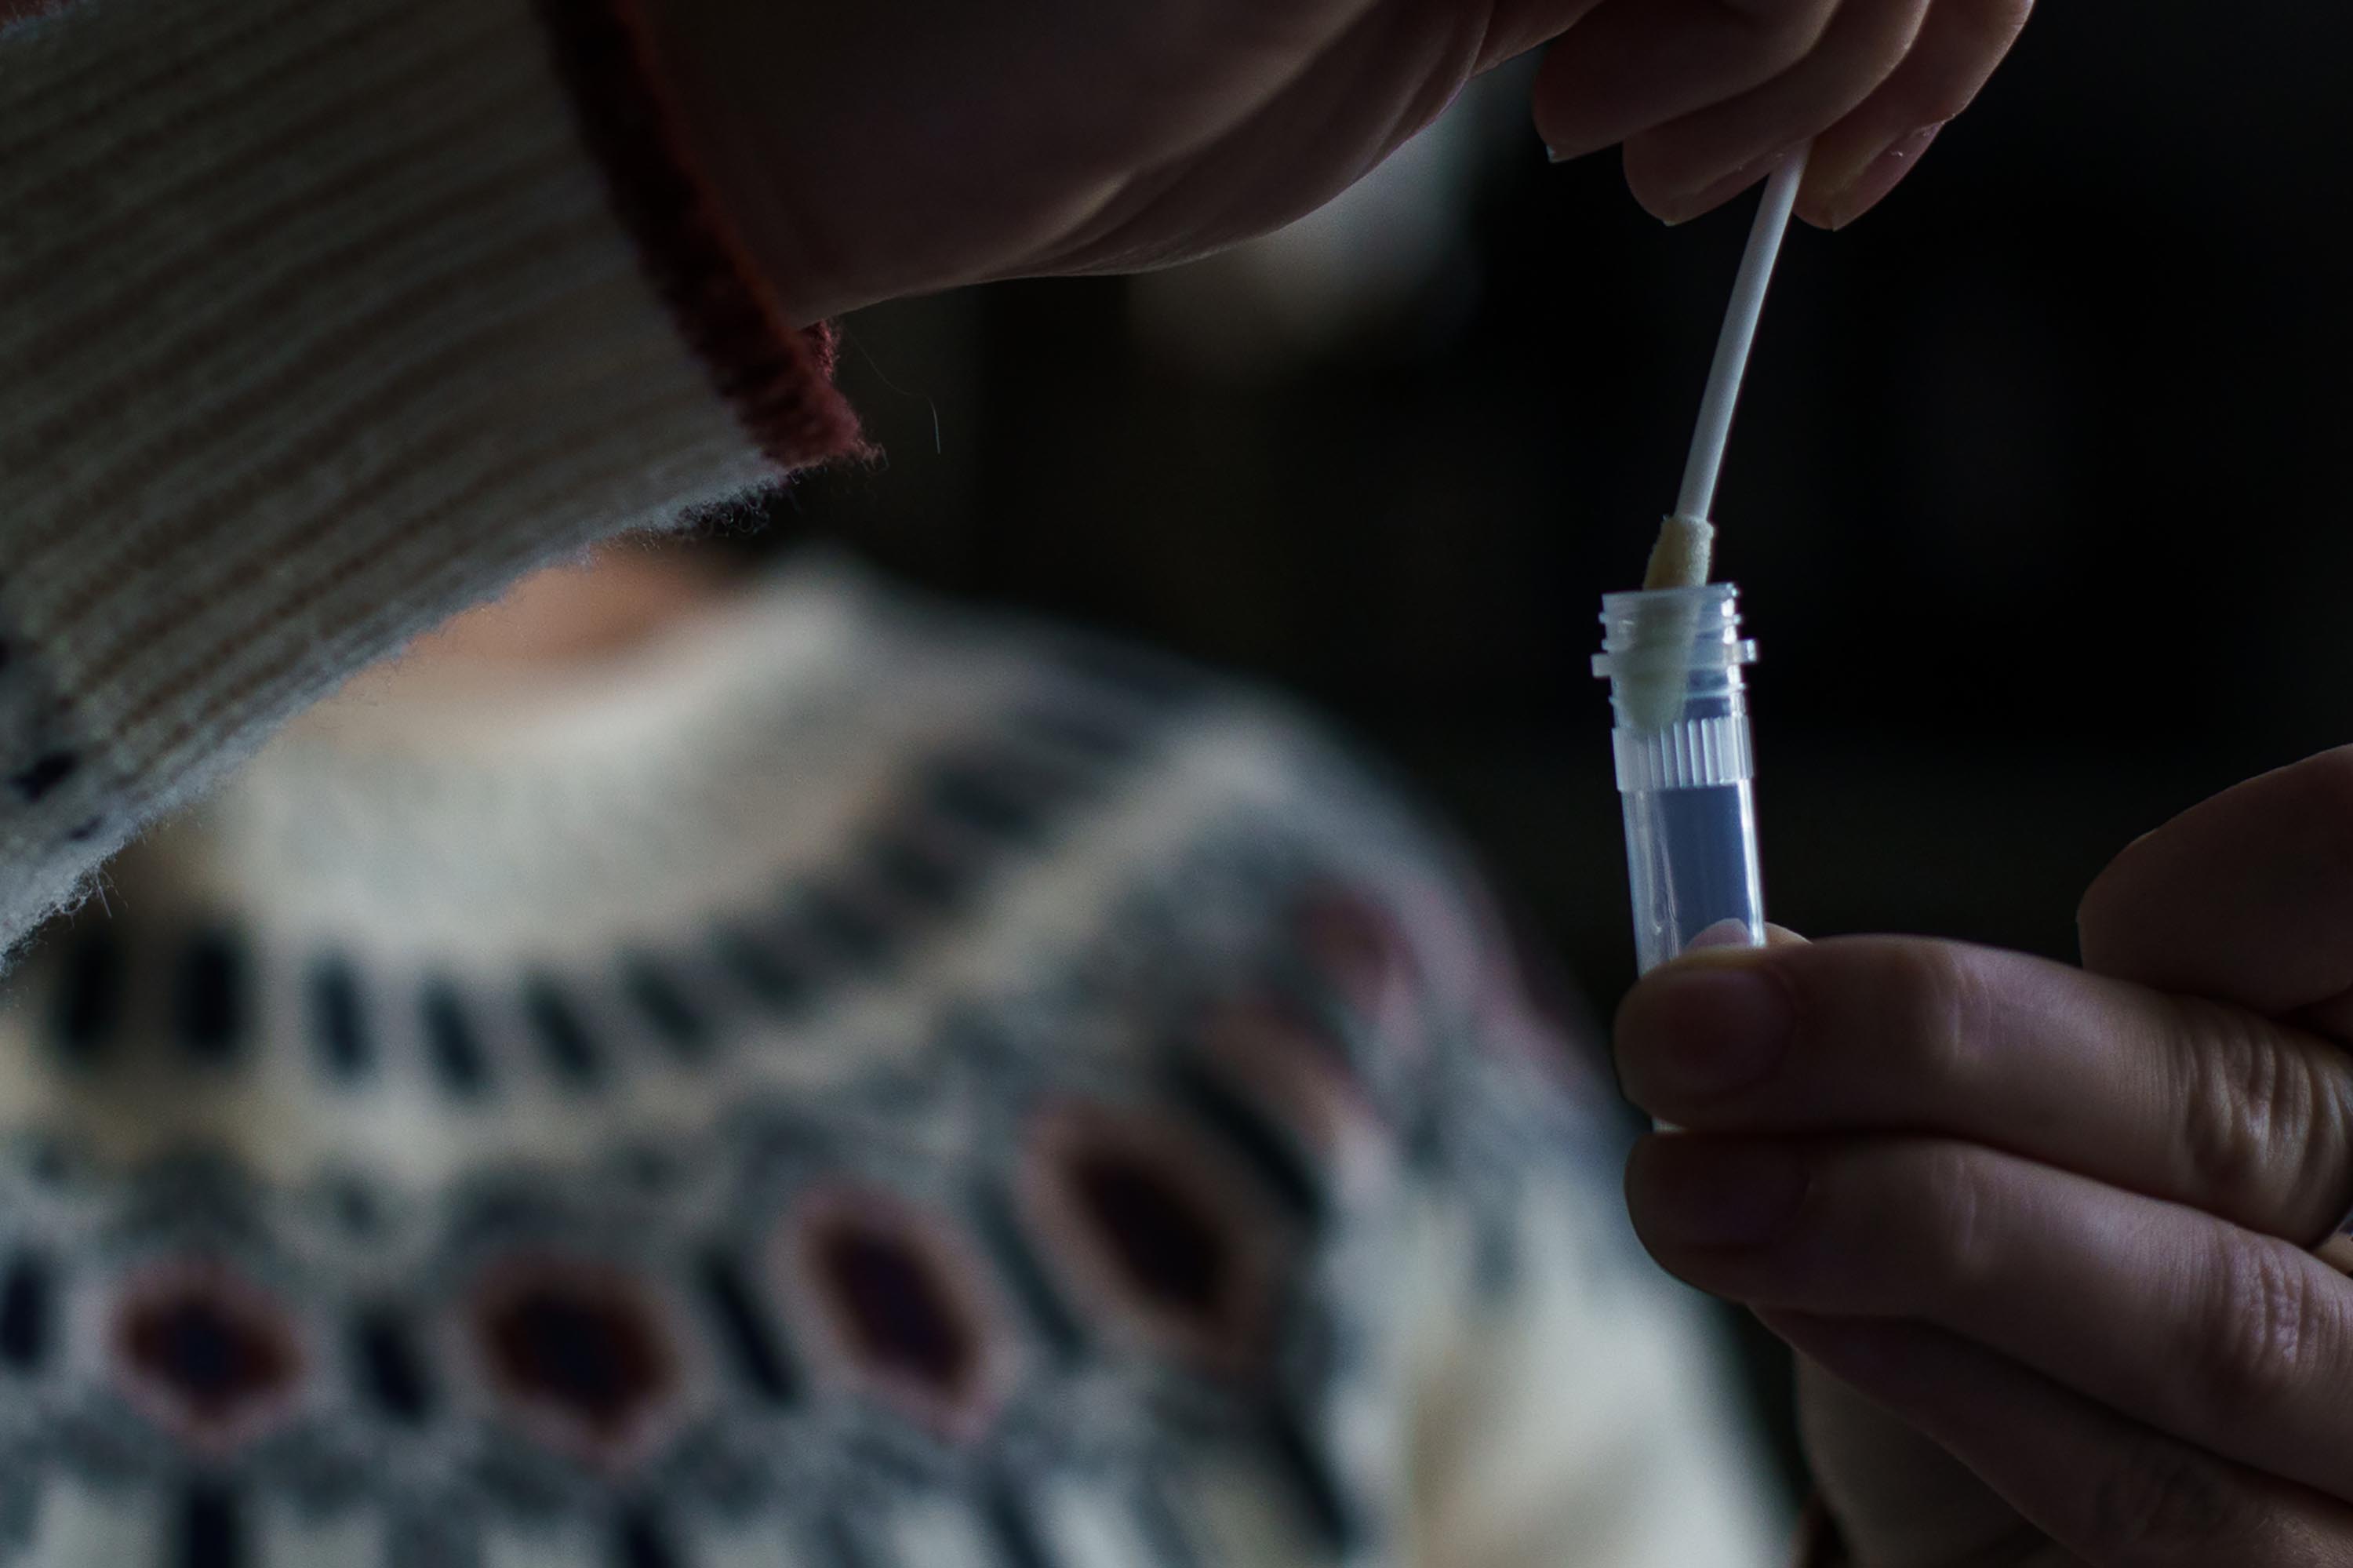 A resident processes a self-administered at-home Covid-19 test, received through a government program, in Easton, New Hampshire, in December 2021.